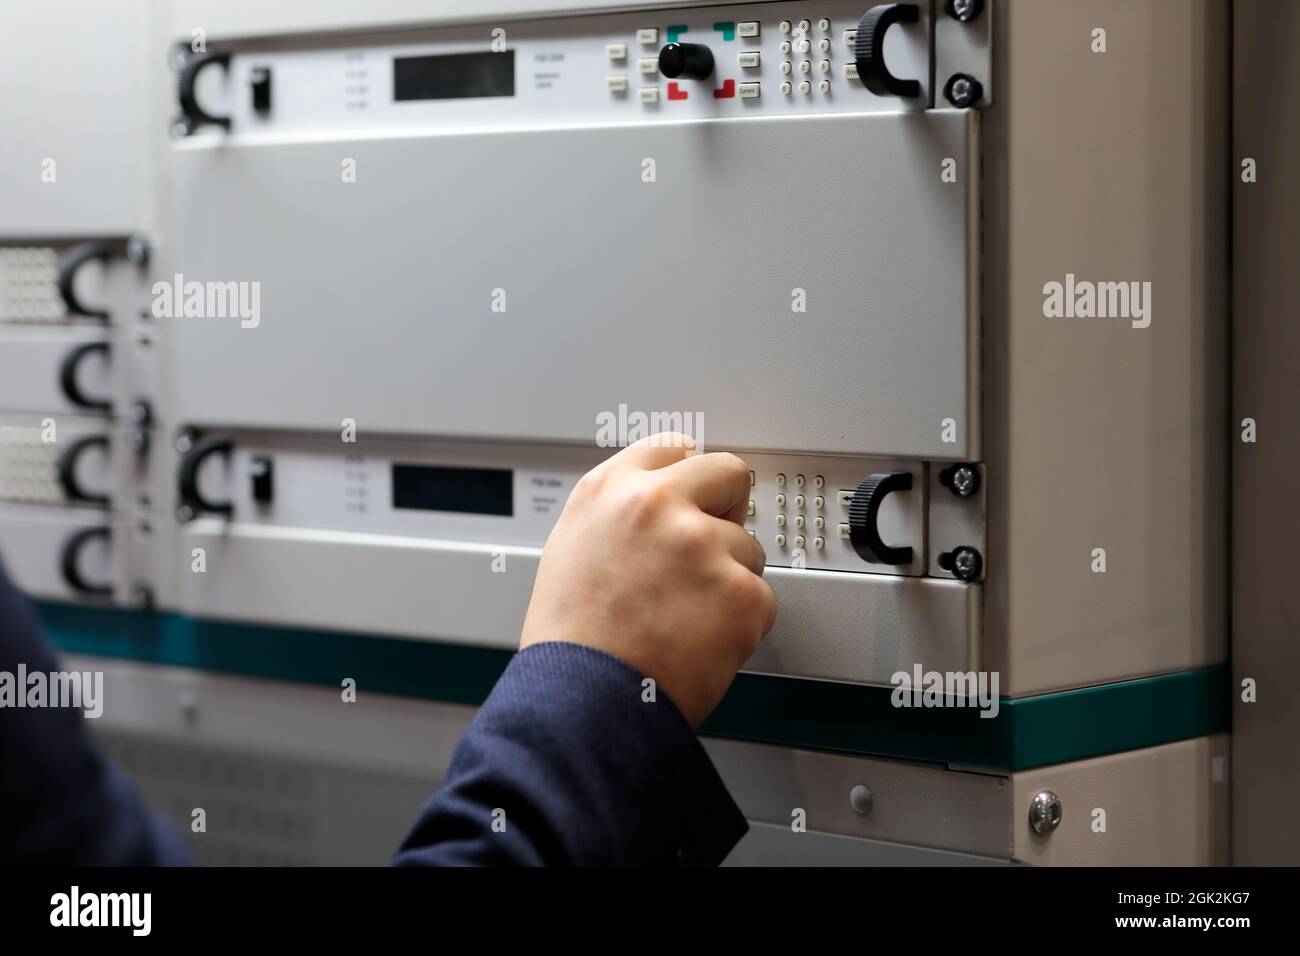 Engineer controls industrial digital equipment mounted in a rack. Selective focus. Stock Photo